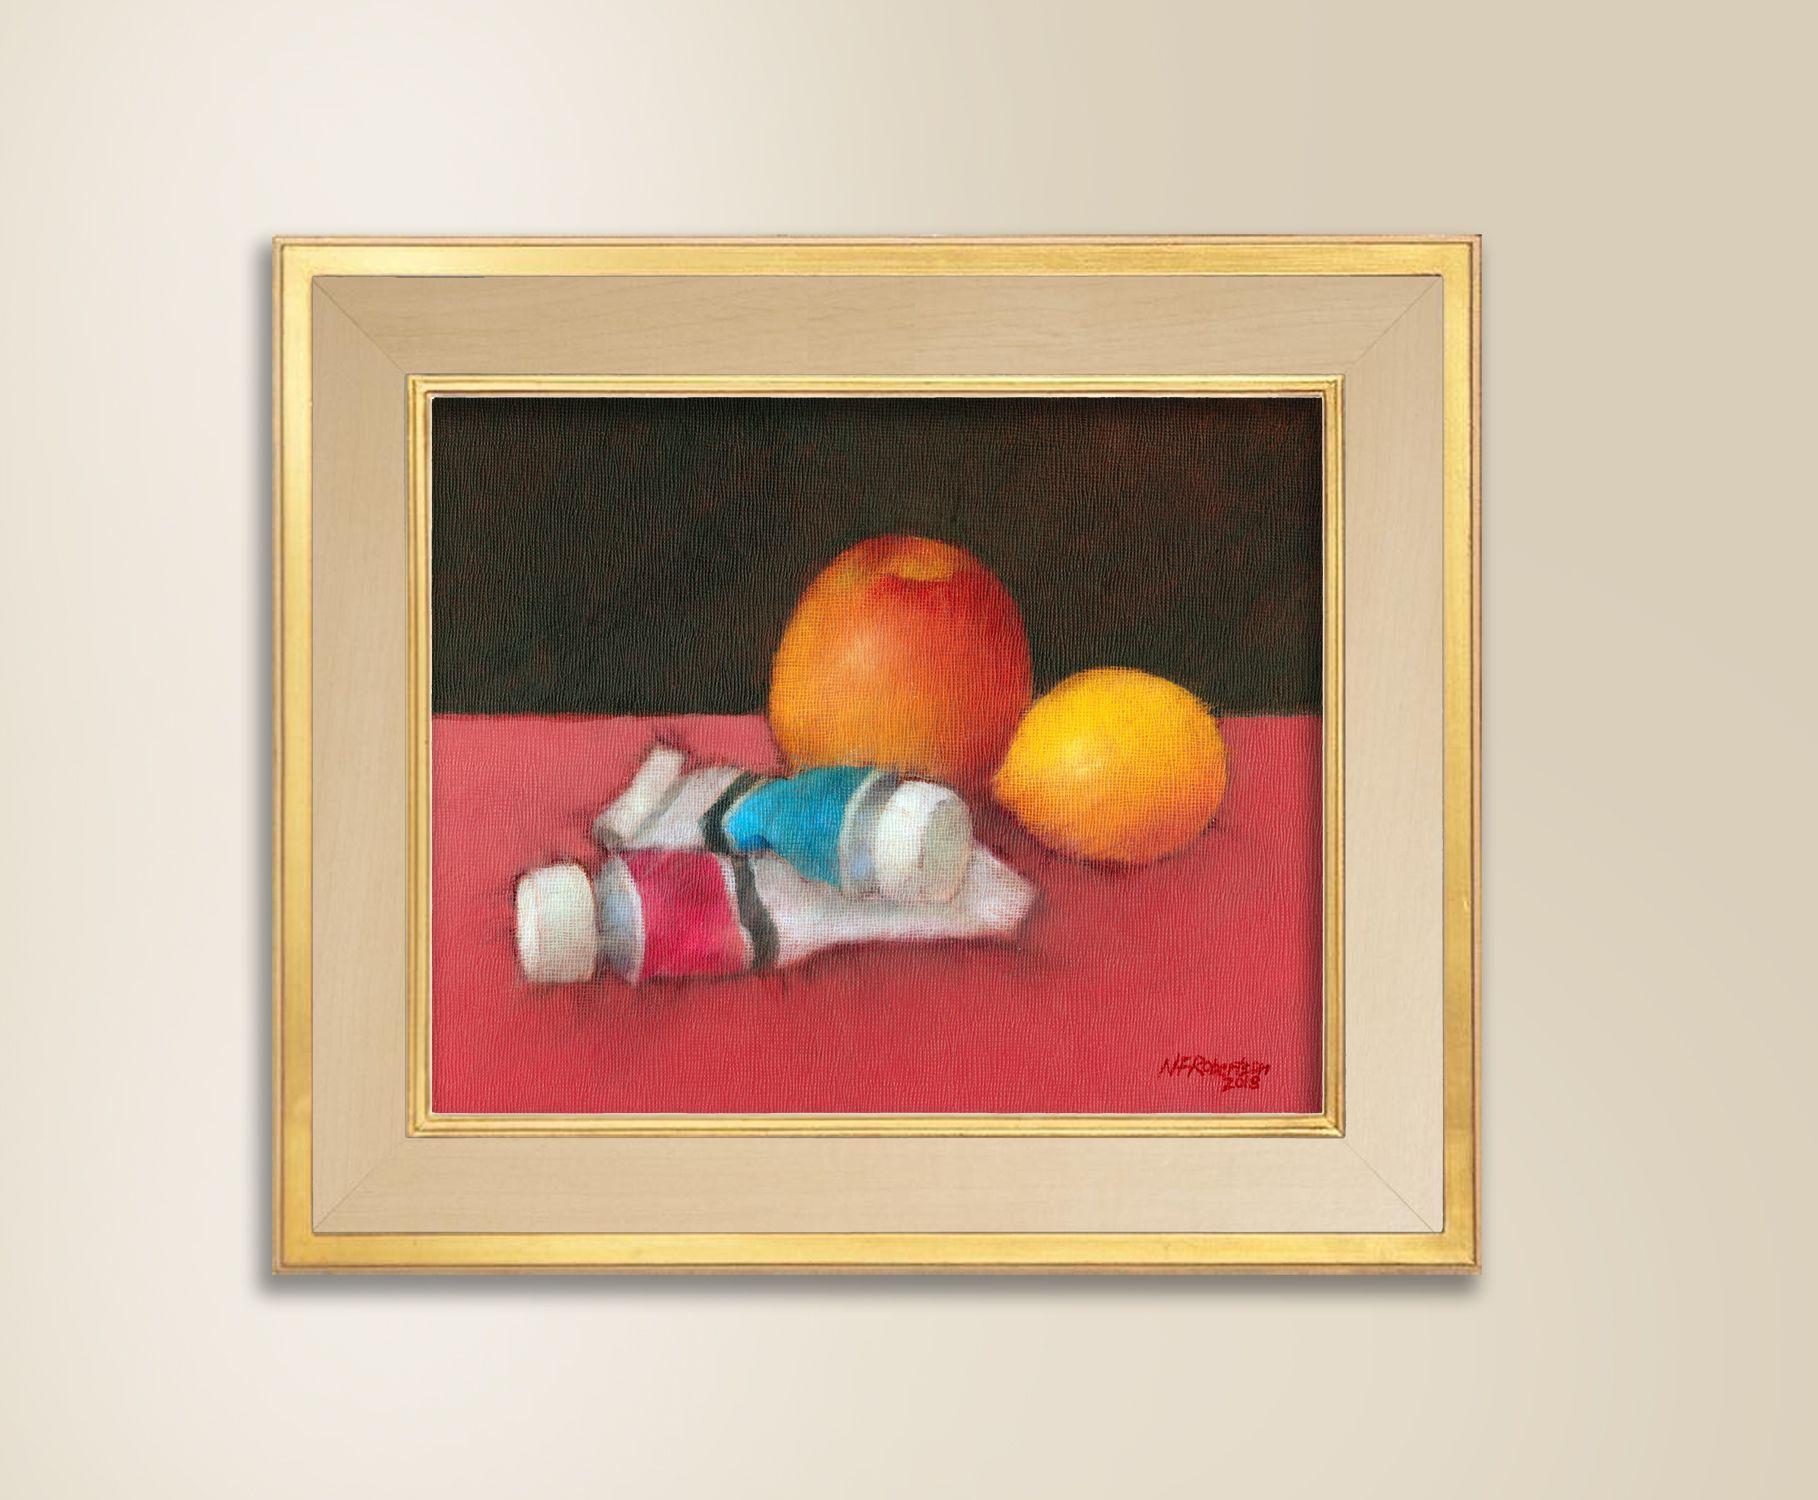 Well what can one say about a Still Life painting, it is what it is. This particular painting is a warm evocation of stuff that has been hanging around in my studio. Obviously the fruit didn't hang around that long, as I ate the one and returned the